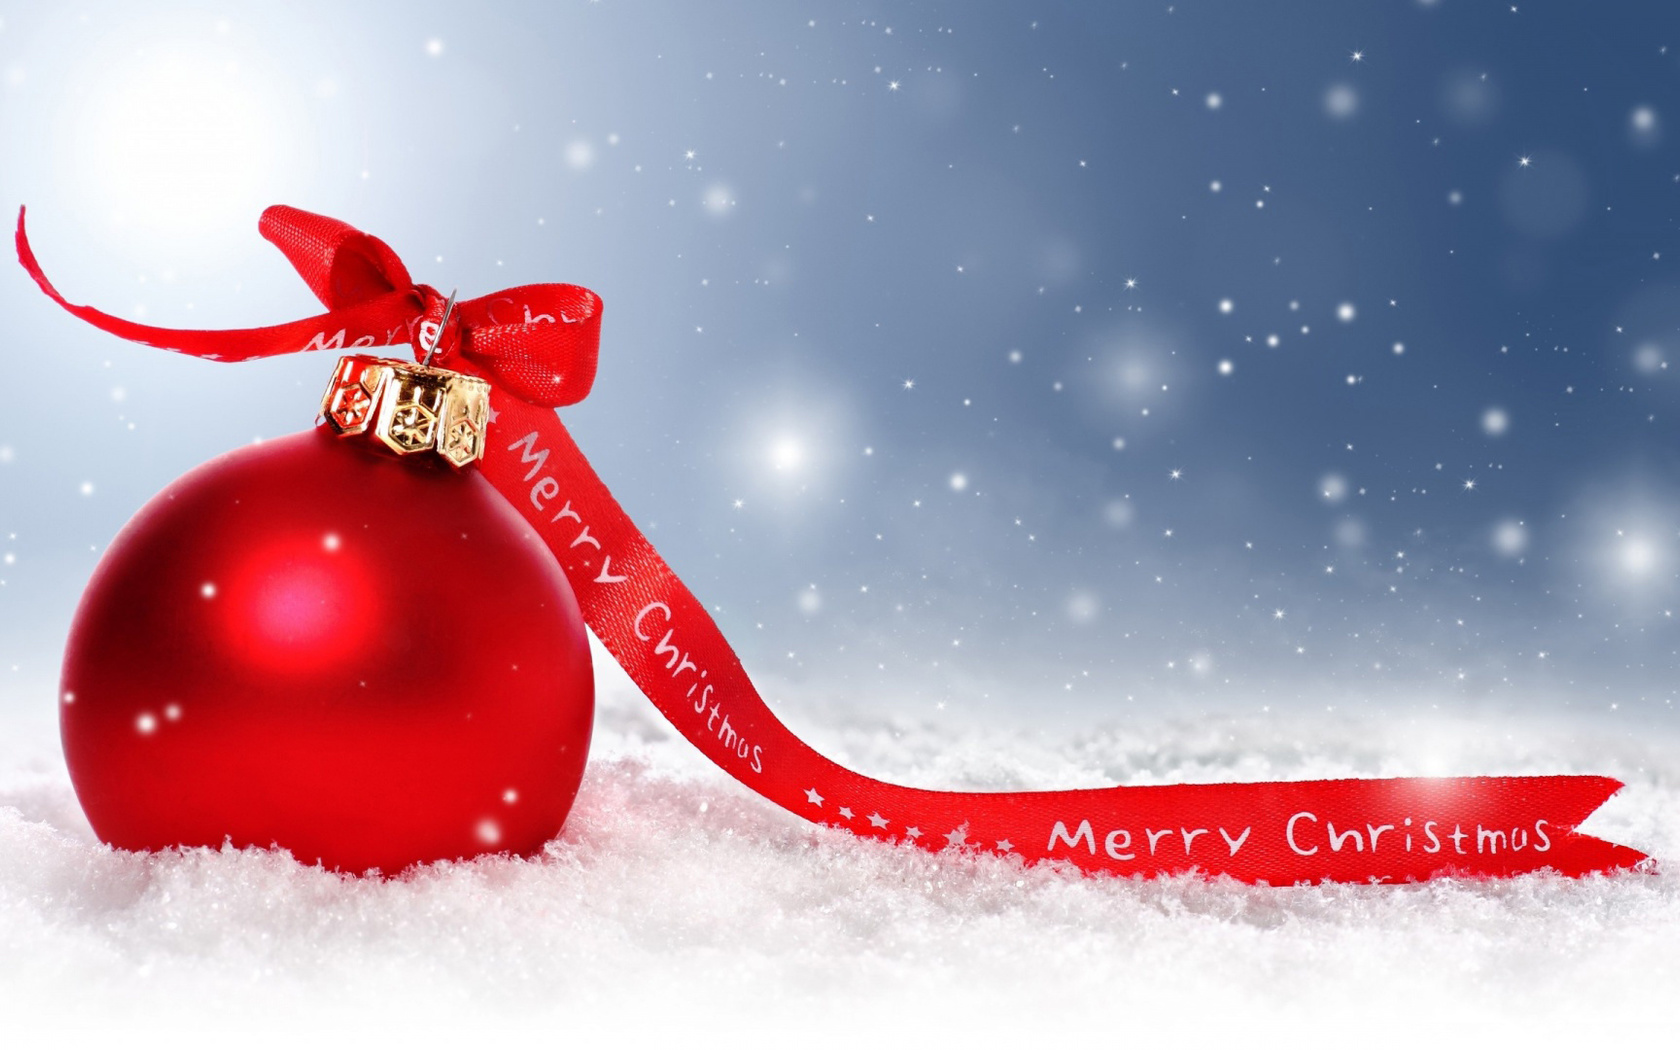  , , ,  , , , , new year, christmas, , , , snow, , , , , hd wallpapers, background, wallpaper